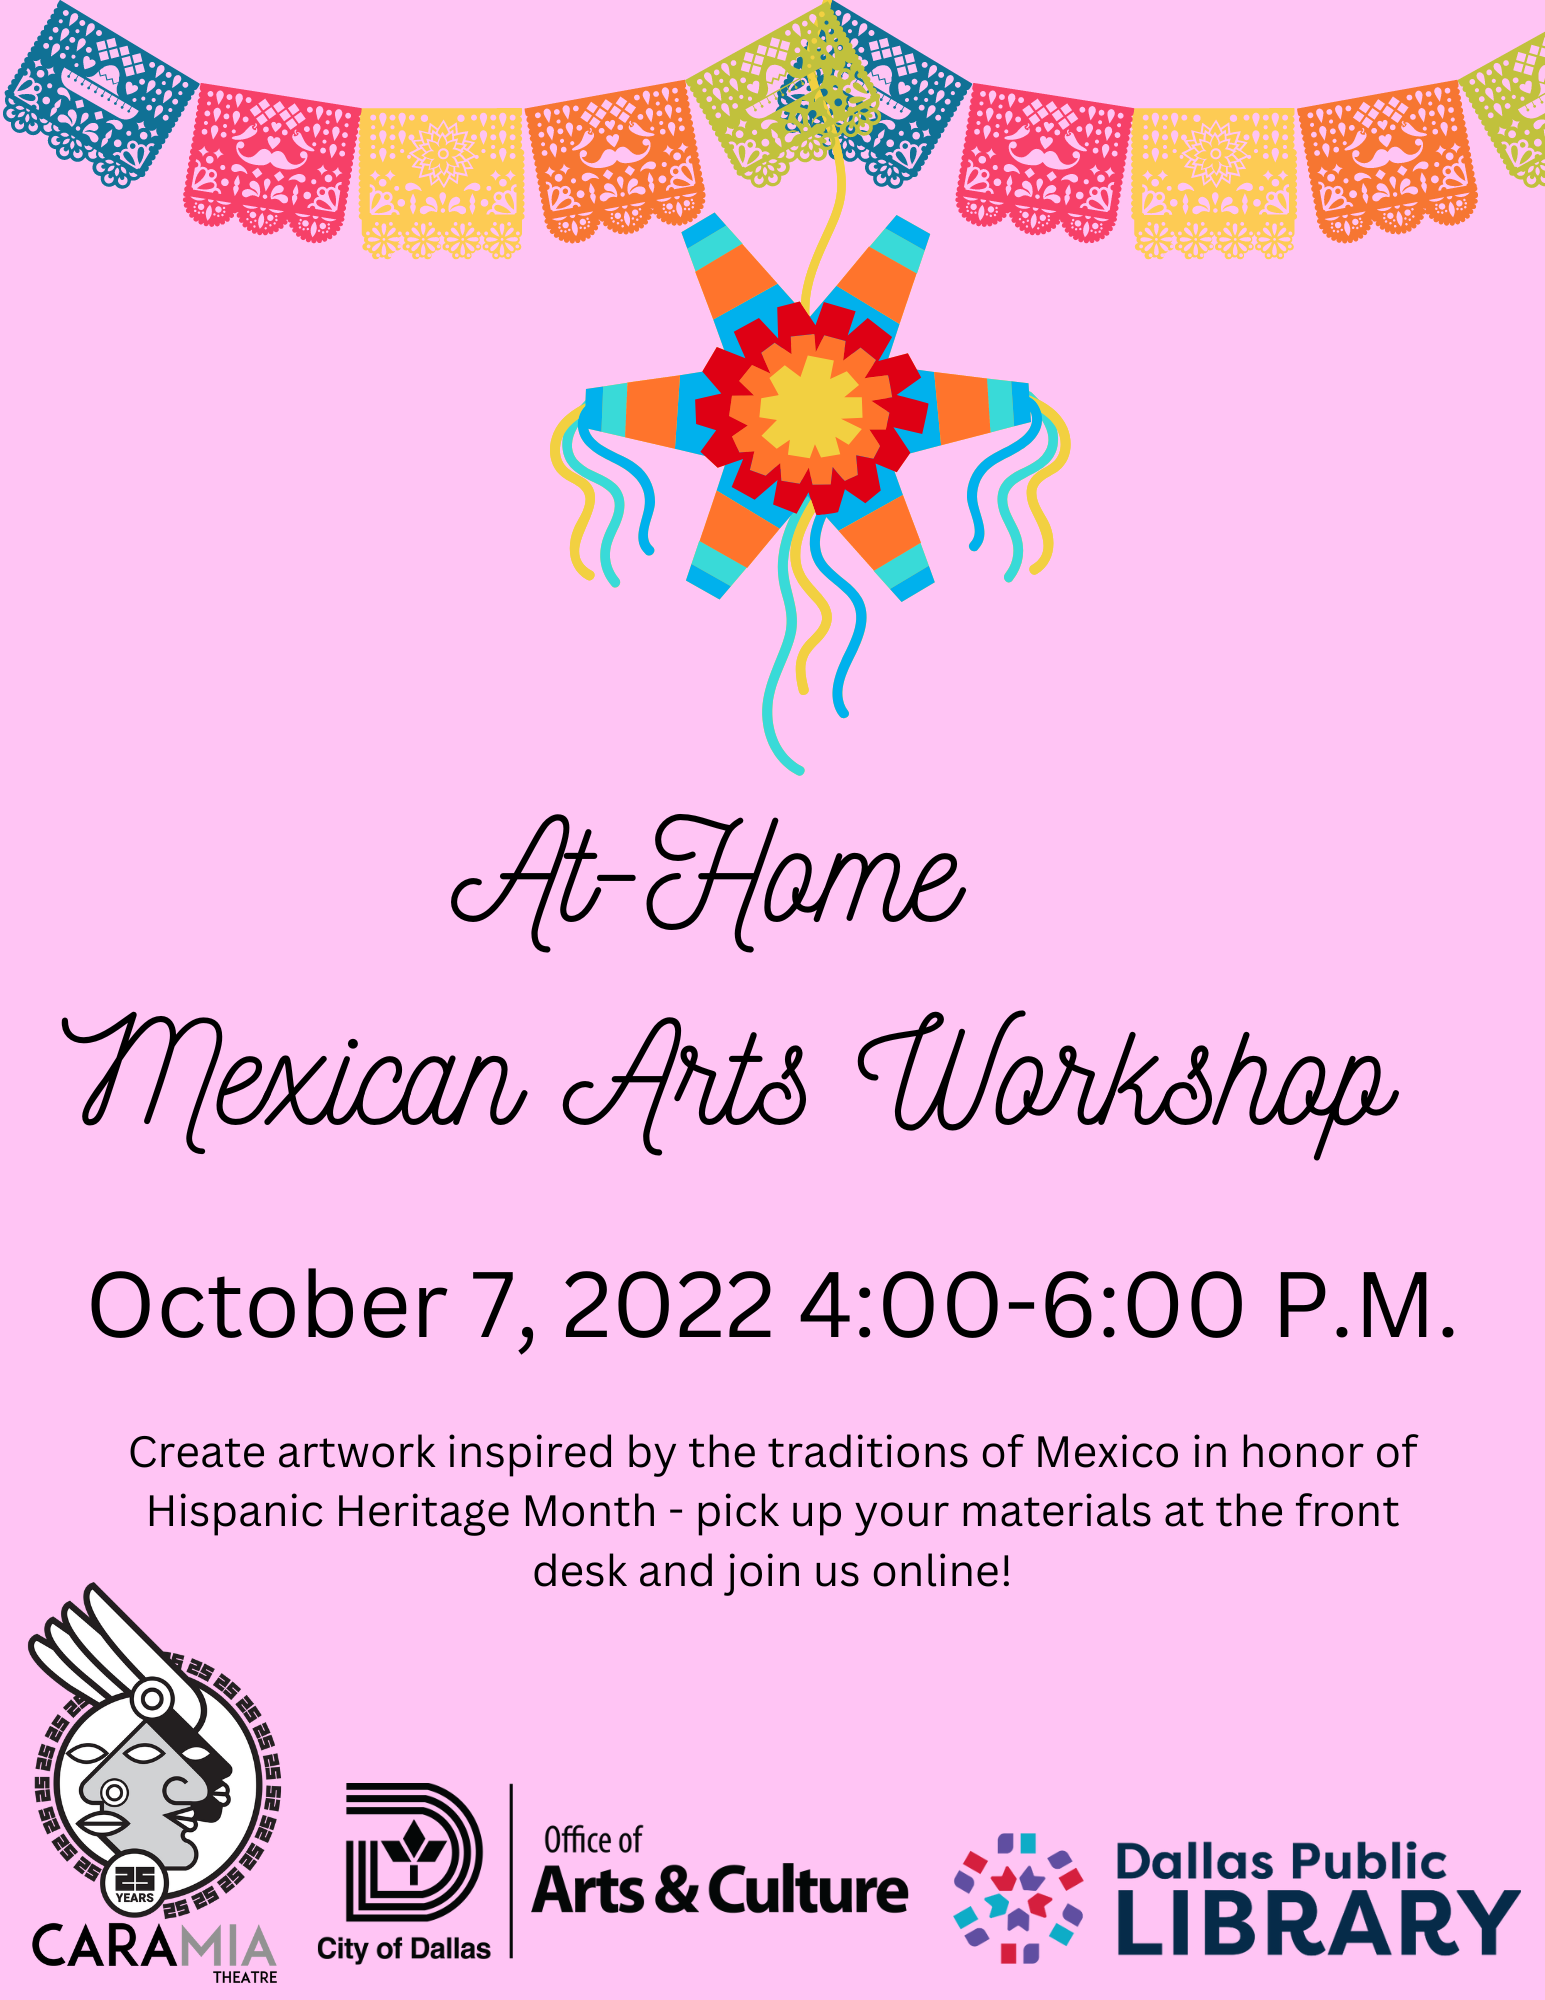 At-Home Mexican Arts Workshop presented by Cara Mia Theatre